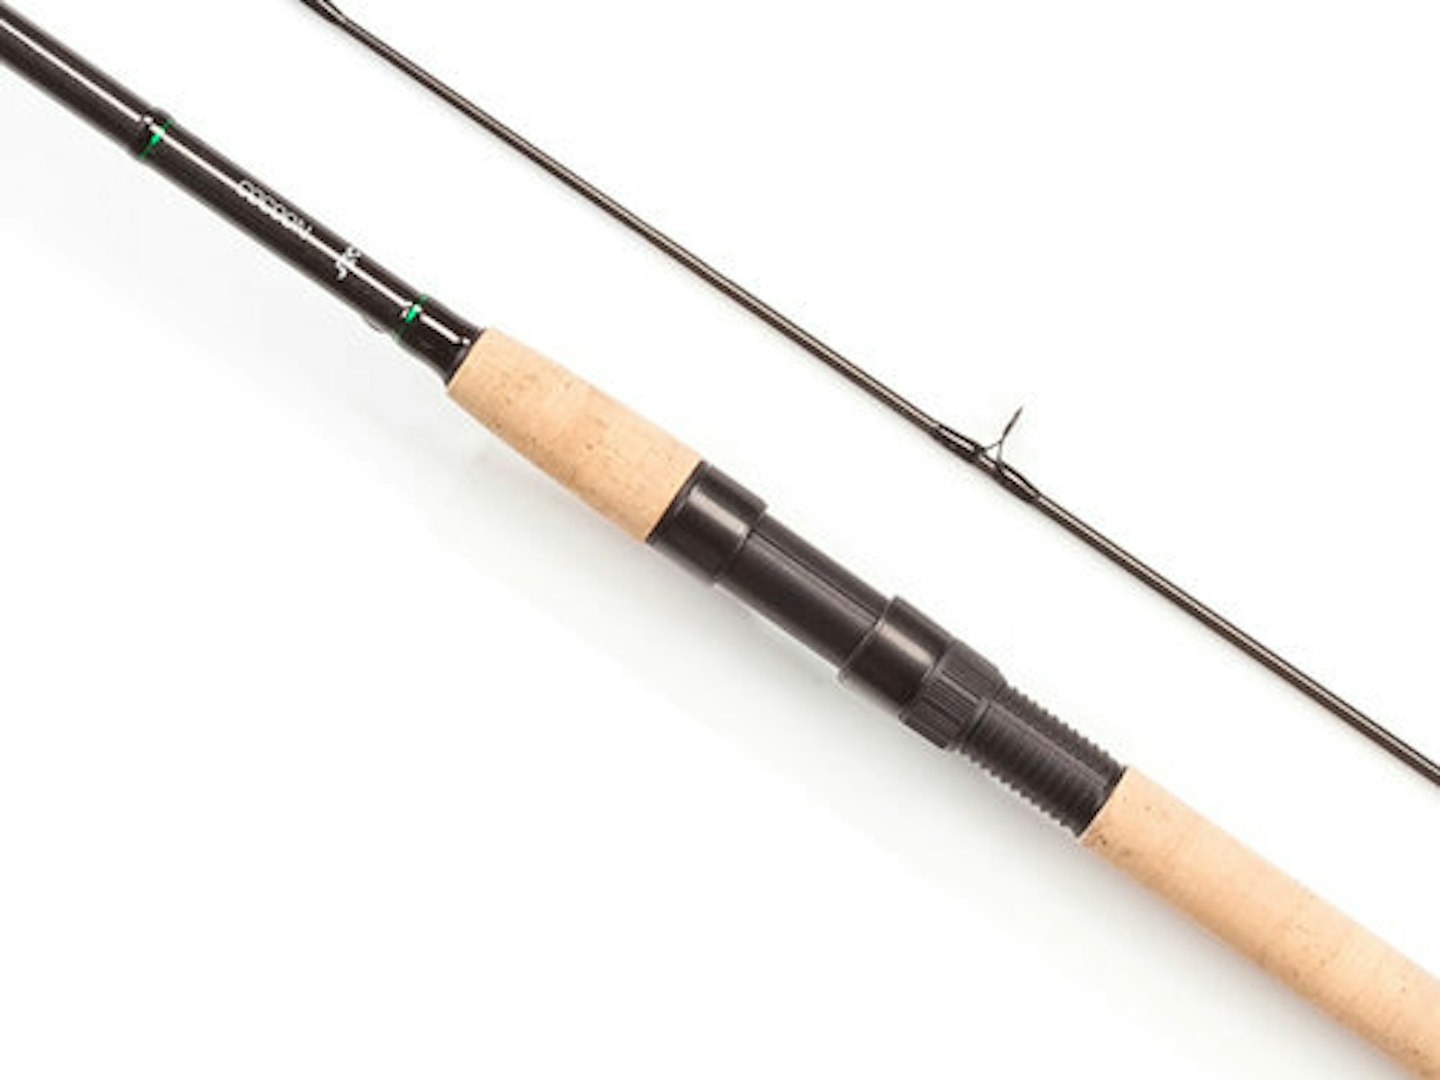 BUYER'S GUIDE TO THE BEST FLOATER FISHING RODS FOR CARP - Image Asset%20 %202021 03 04T114848.237